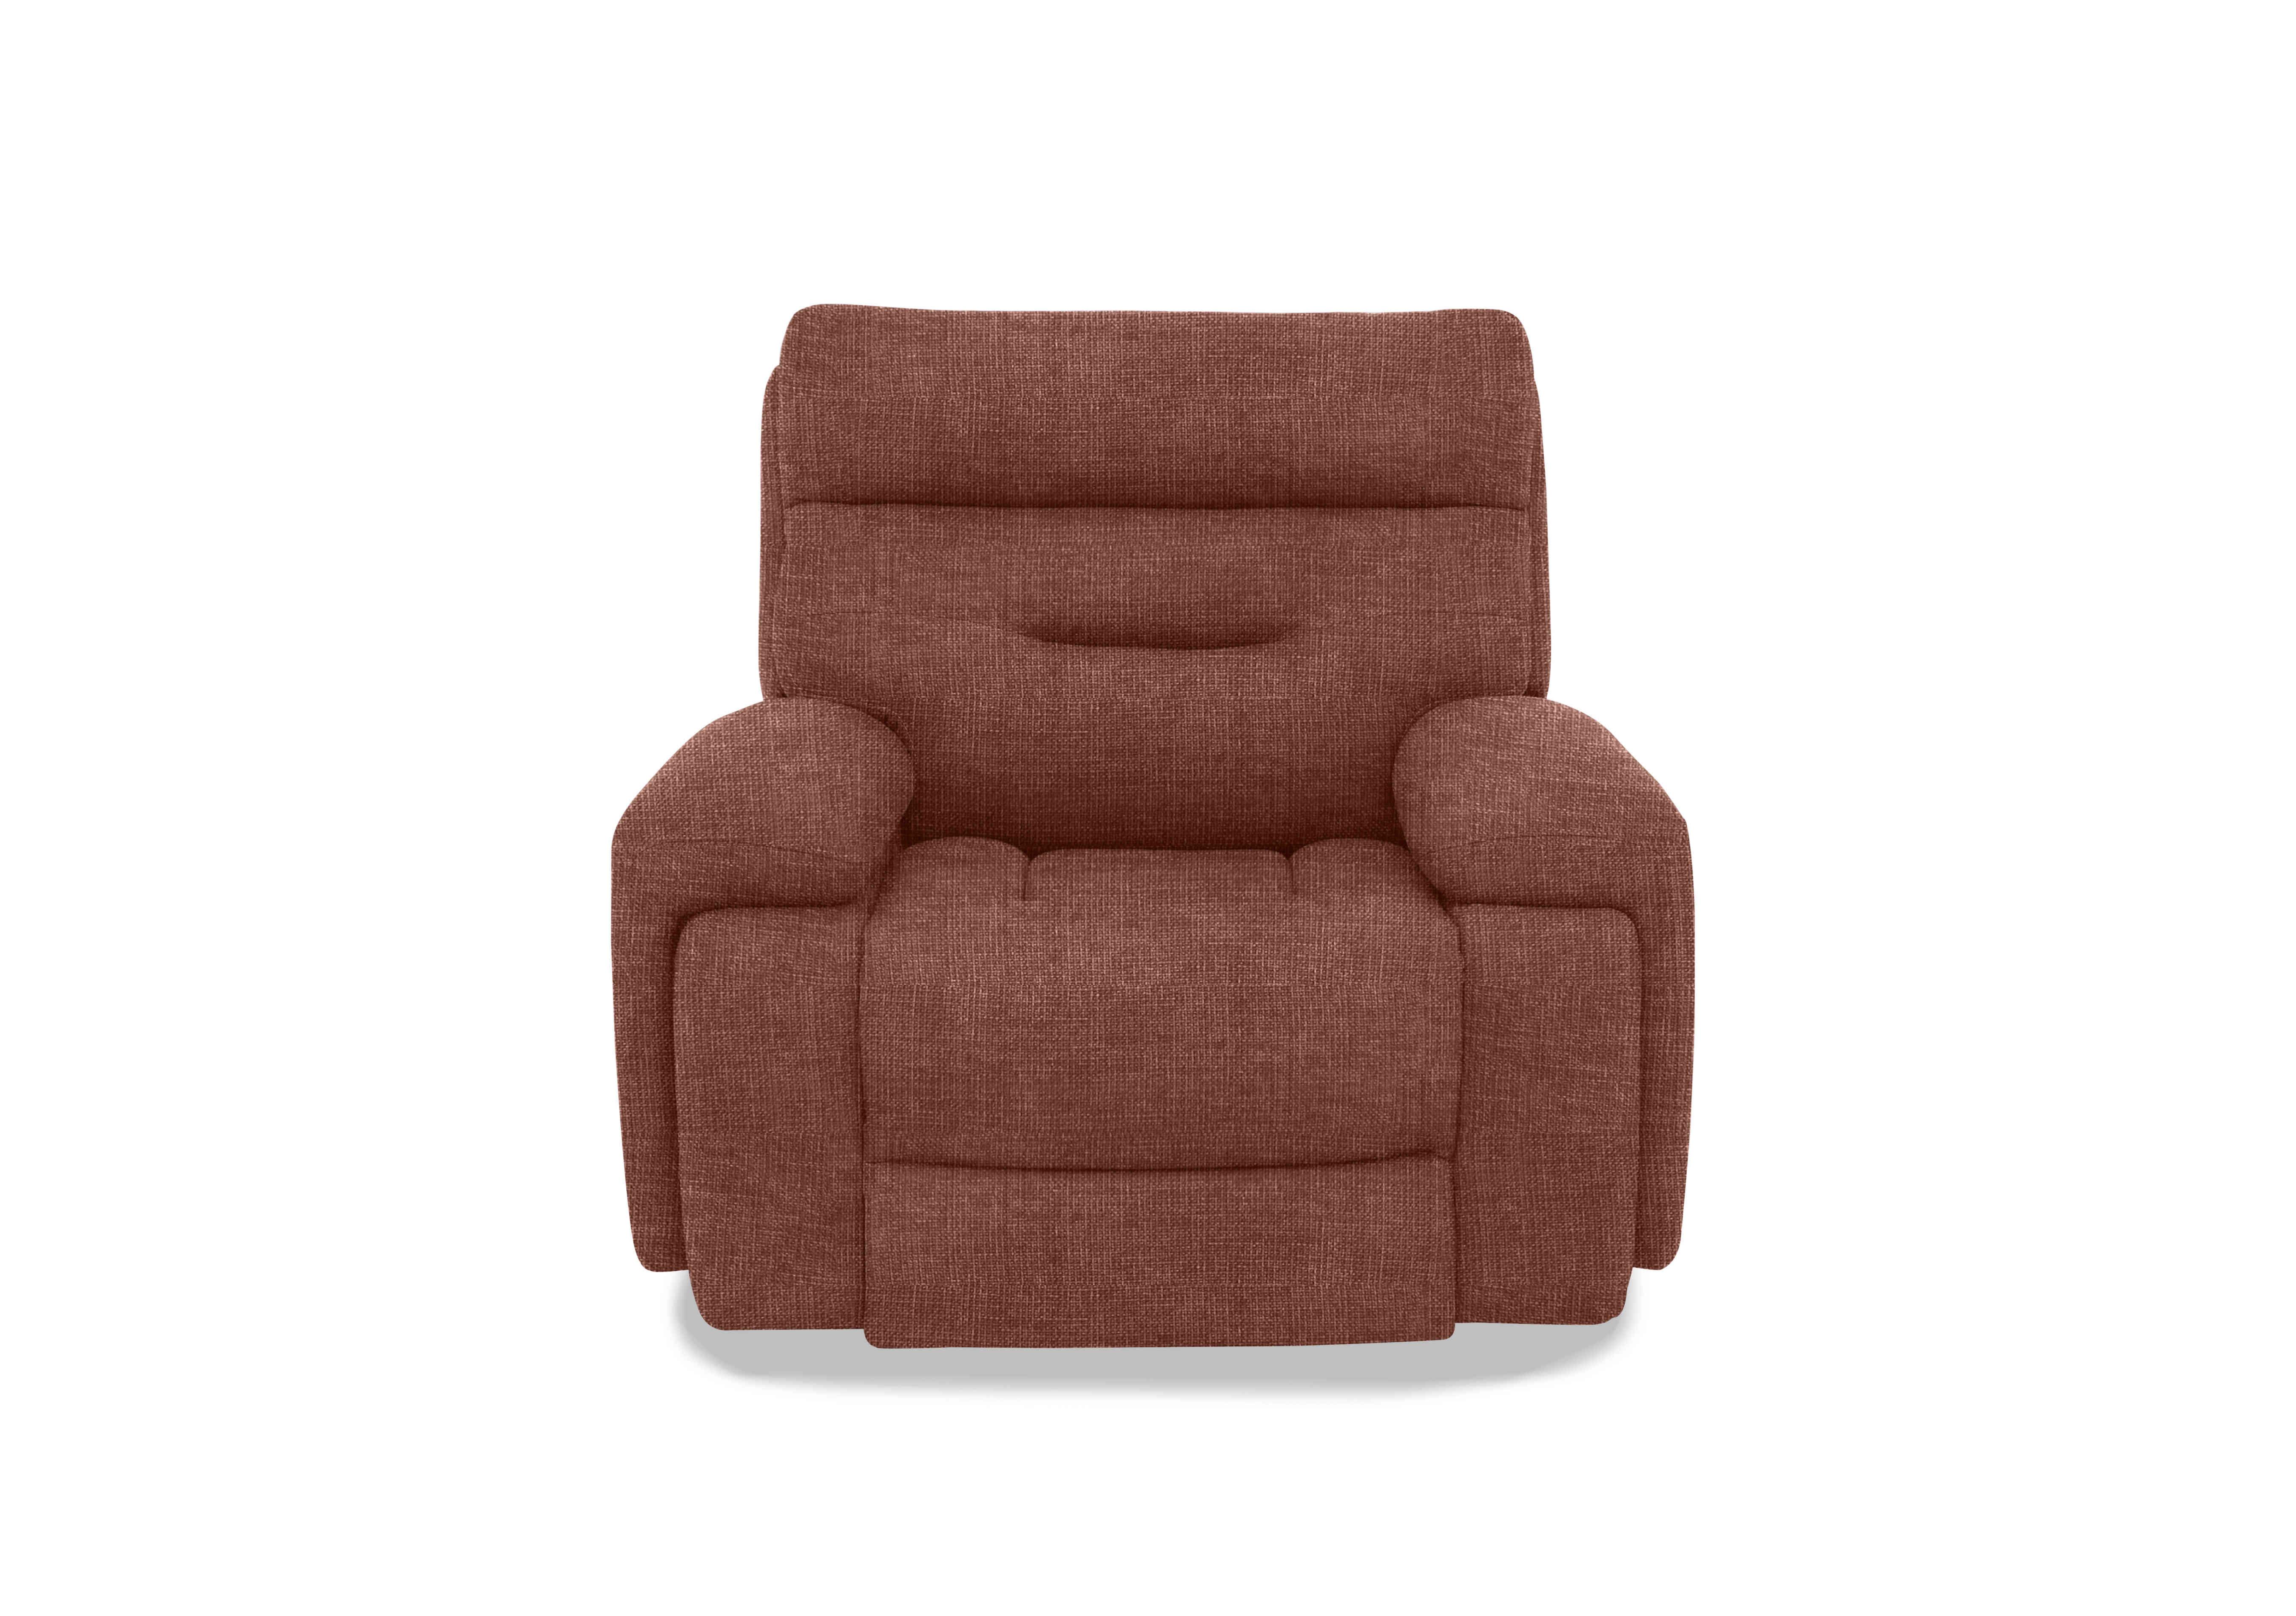 Cinemax Media Fabric Power Recliner Chair with Power Headrest in Hf-0105 Halifax Red Maple on Furniture Village